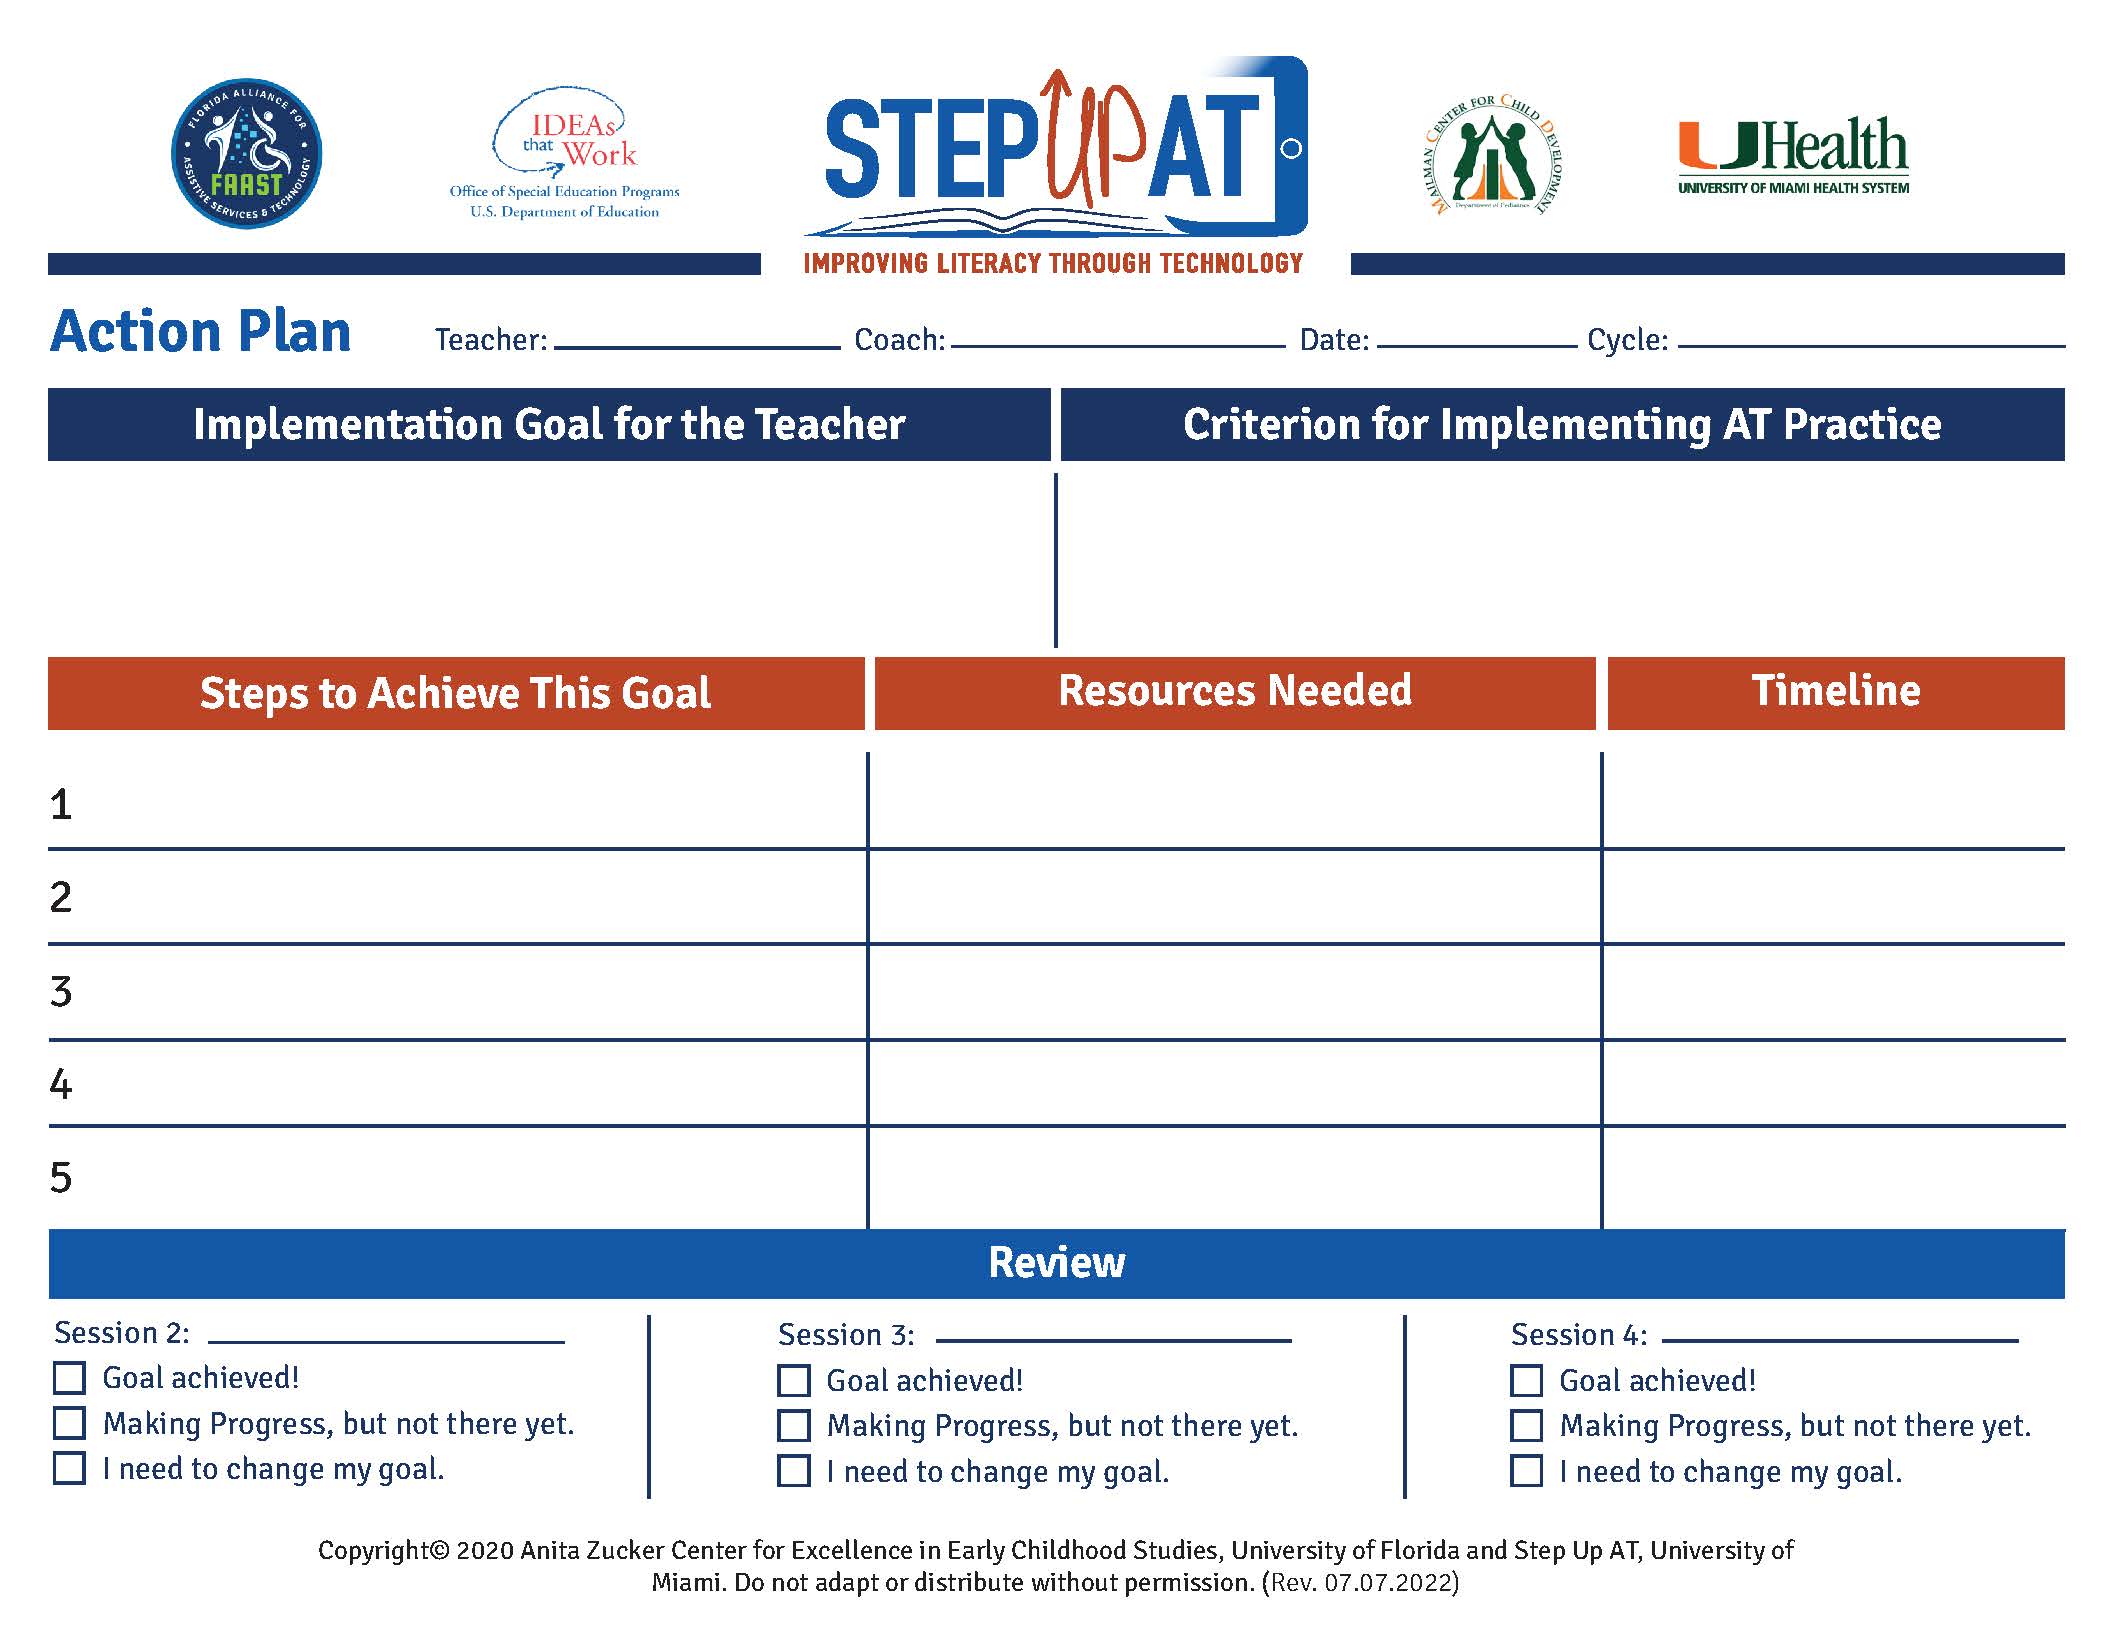 Step Up AT Action Plan